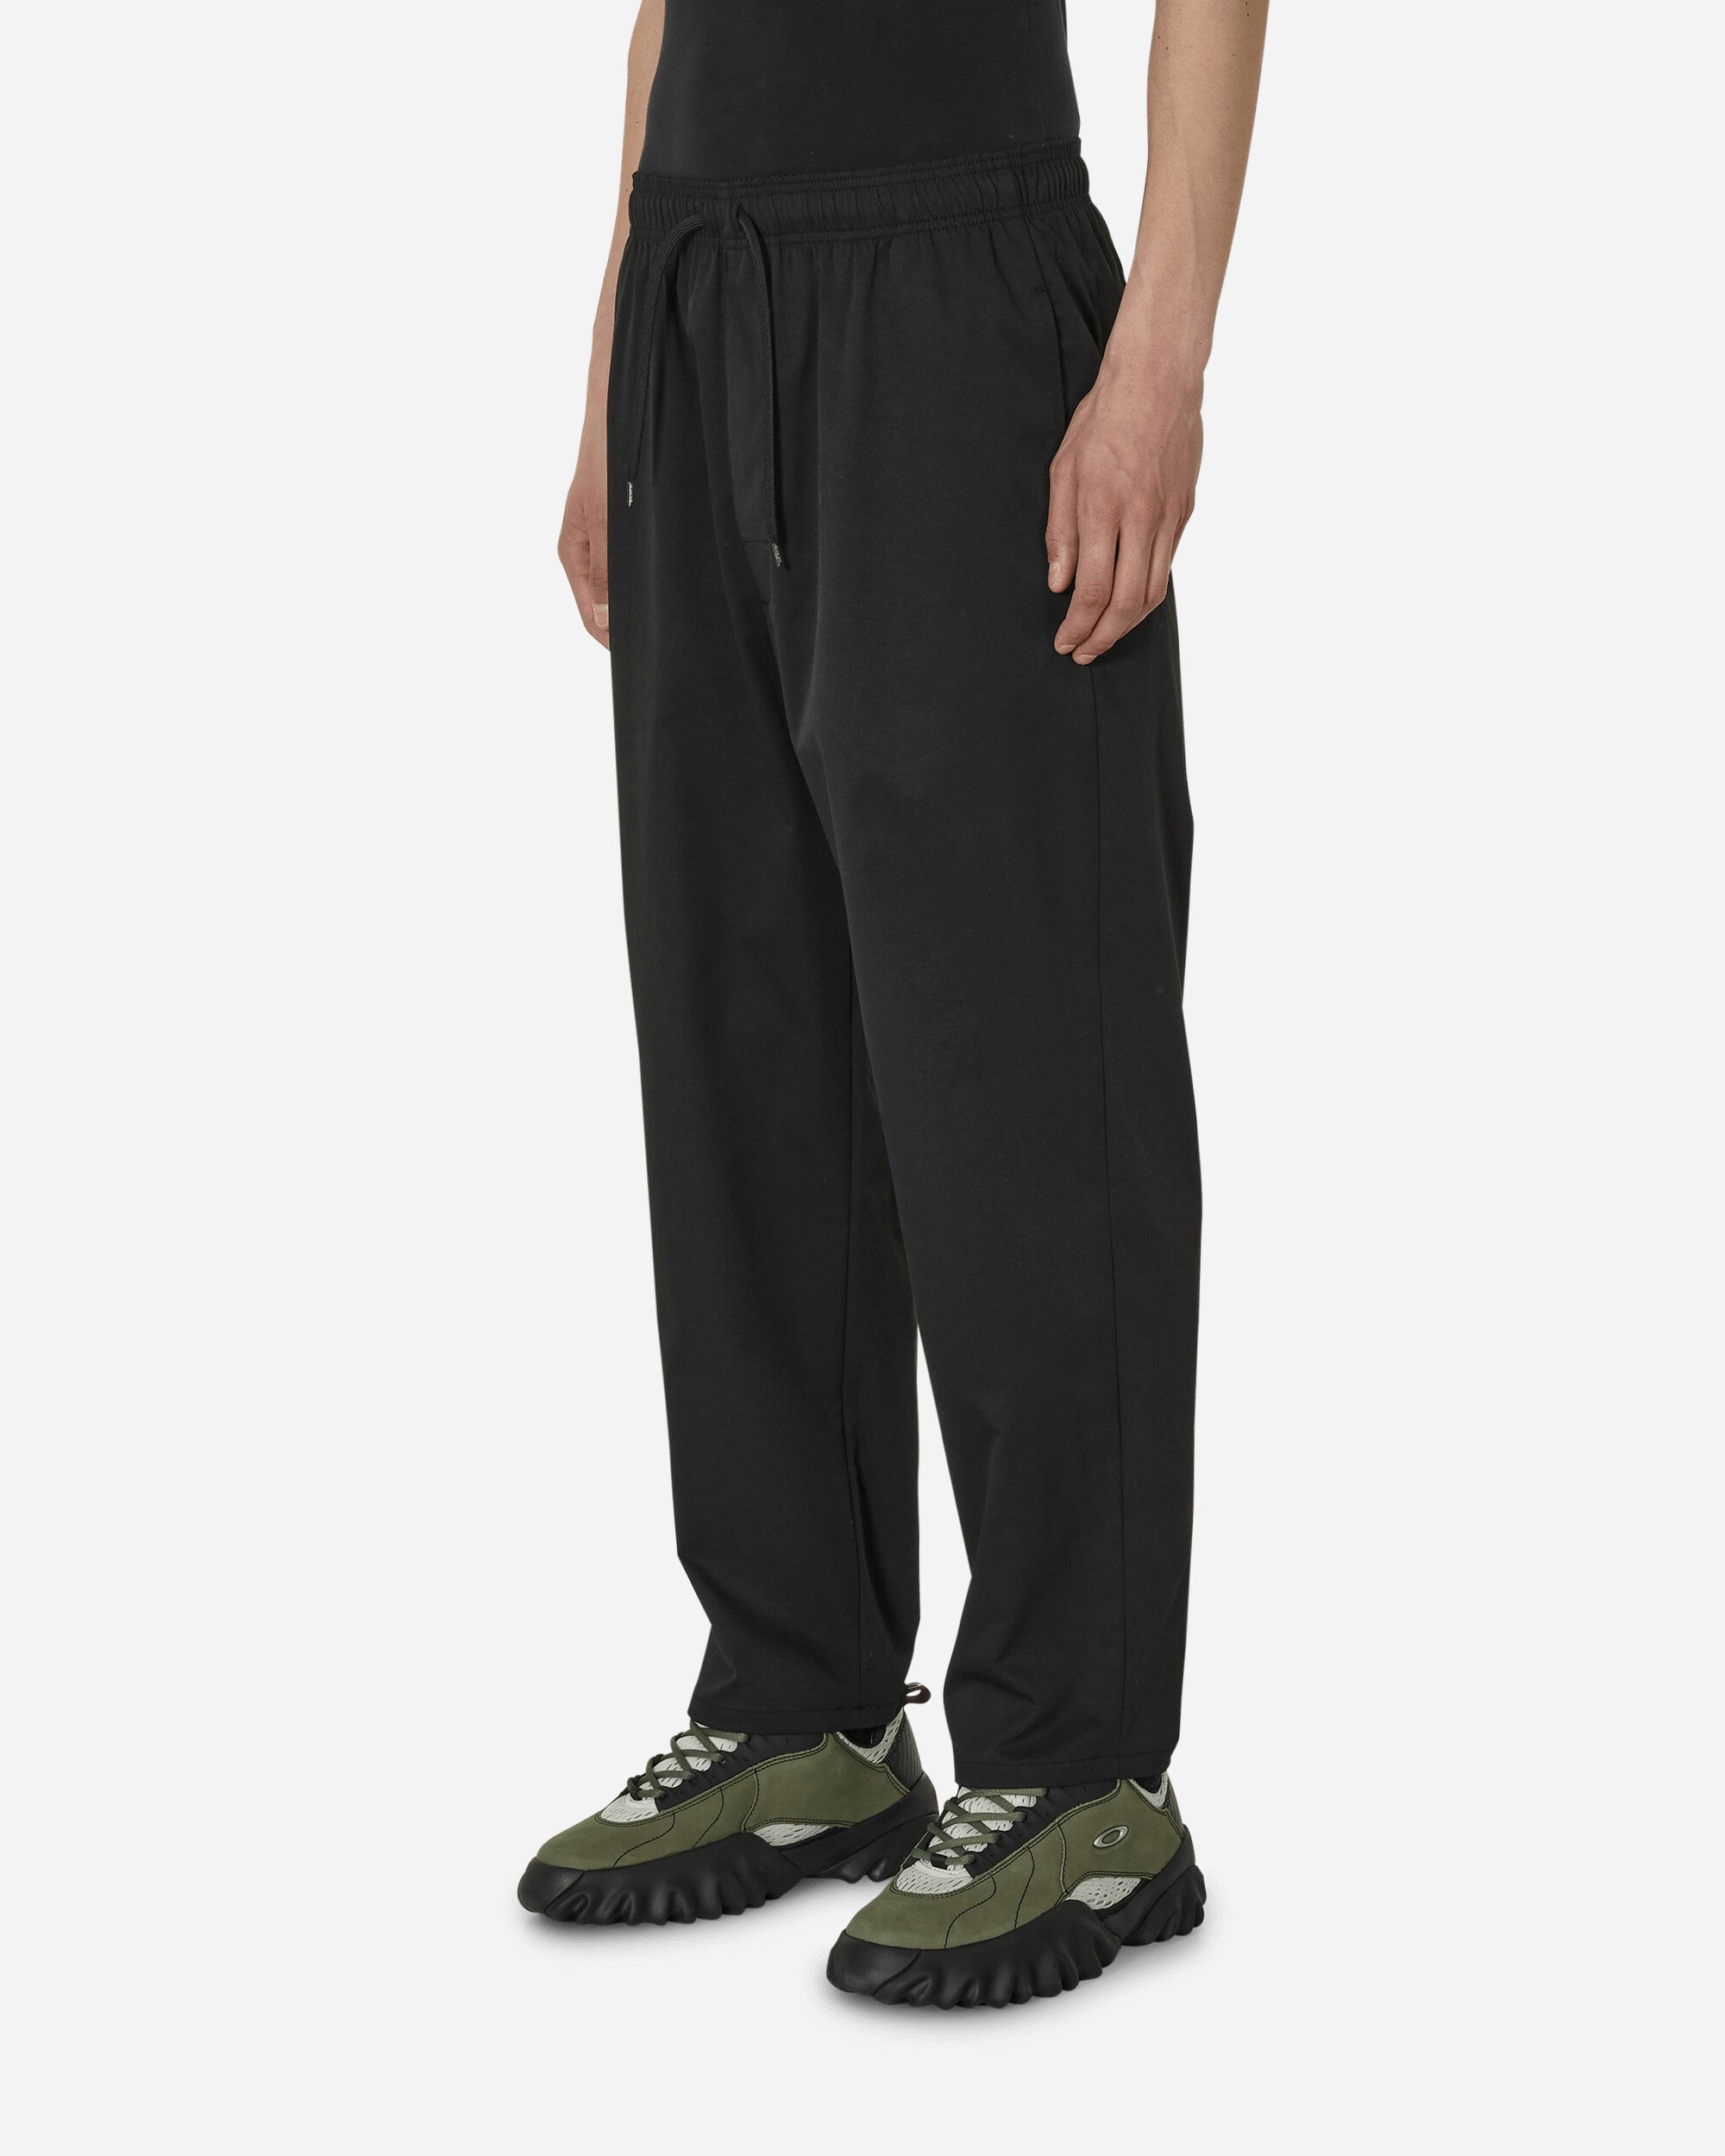 WTAPS 23ss SEAGULL 01 TROUSERS POLY TWIL - ワークパンツ/カーゴパンツ